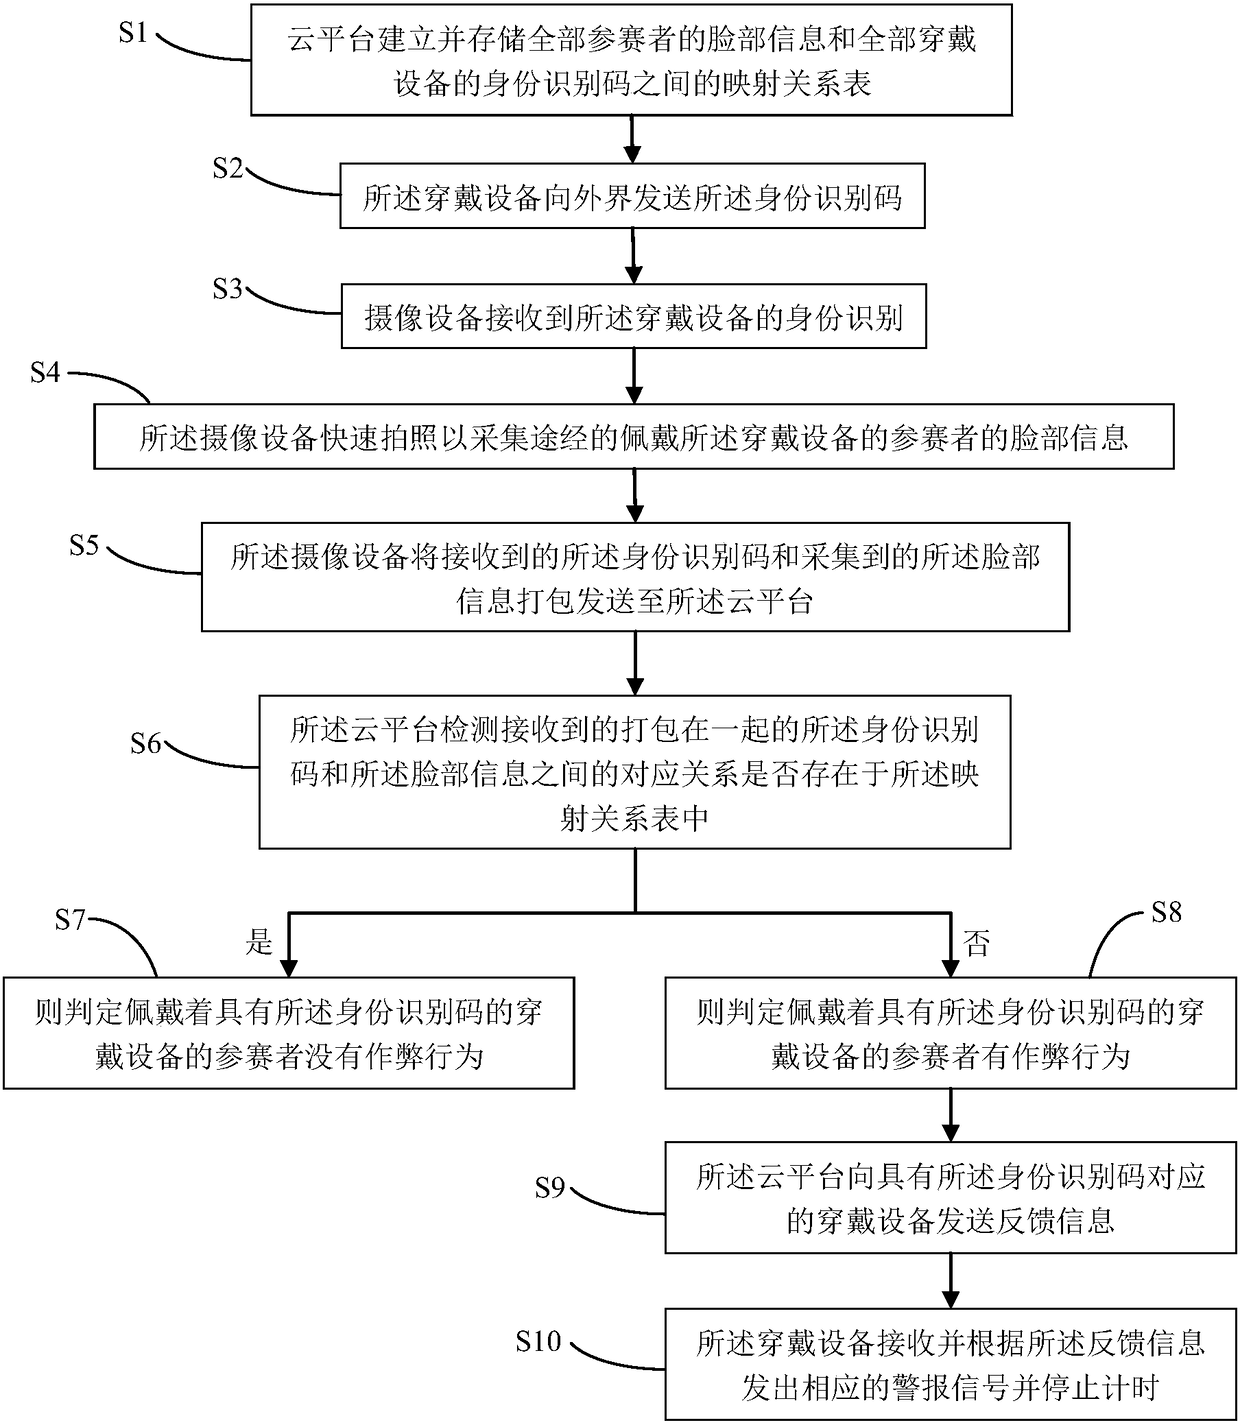 Anti-cheating system and method for middle and long distance running competition